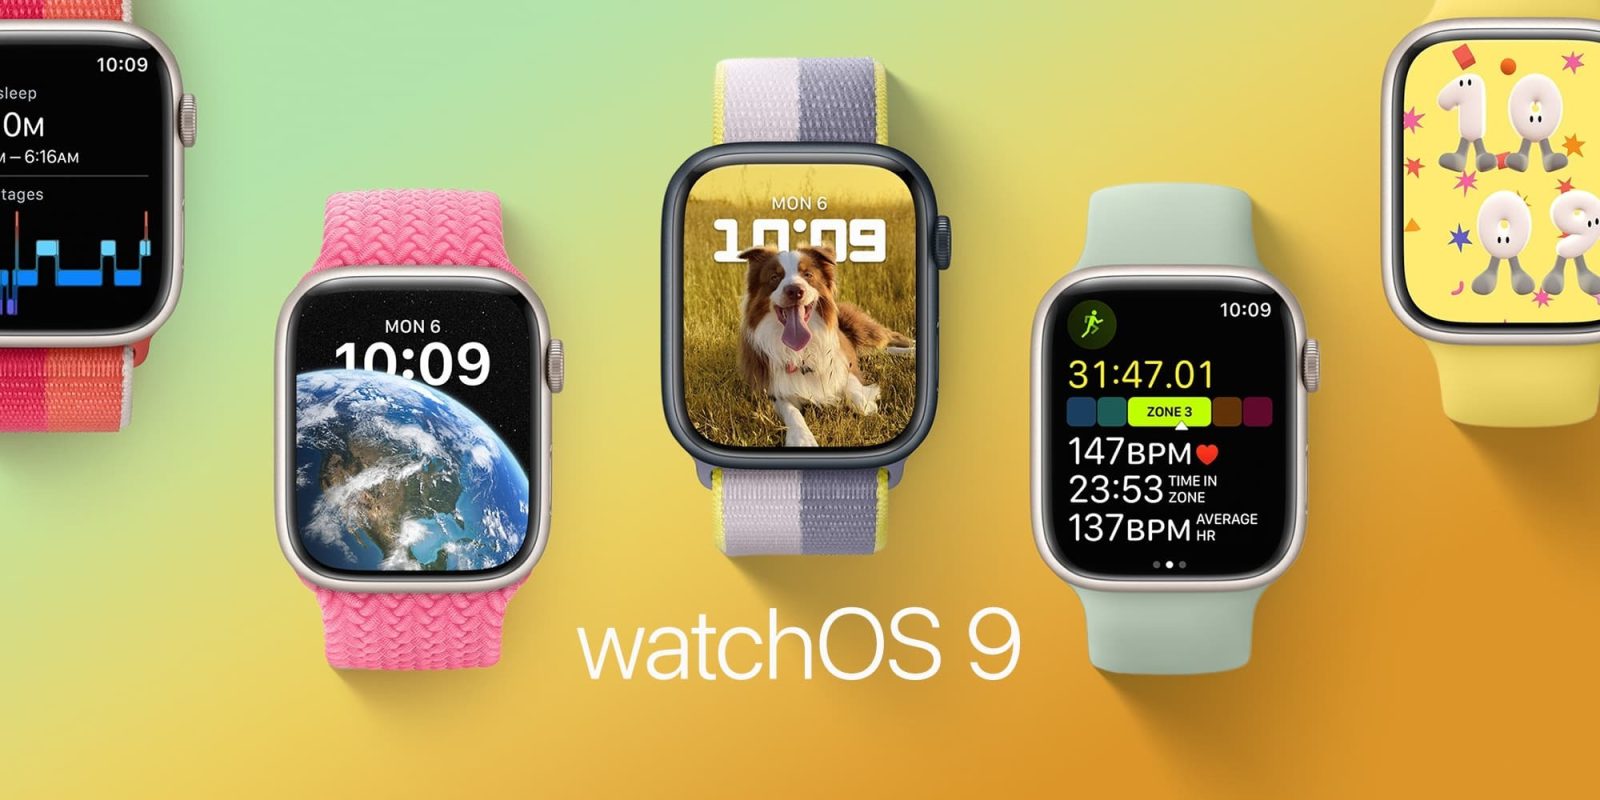 watchOS 9.1 beta update is now available to developers